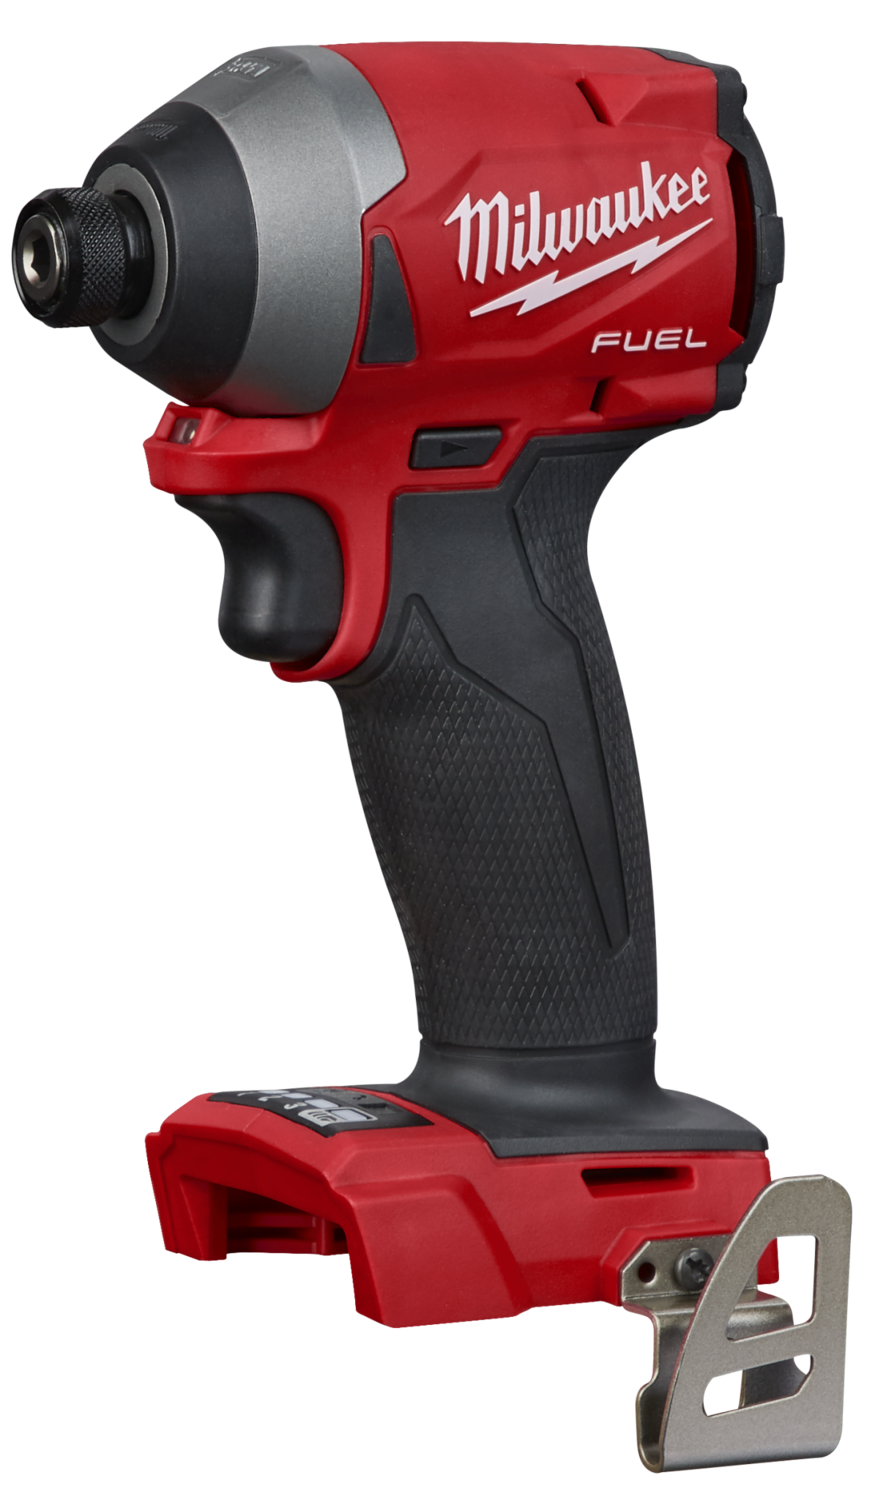 Milwaukee M18 FUEL 2853-20 Impact Driver, Bare Tool, 18 V Battery, 1/4 in Drive, 4-Speed, Black/Red